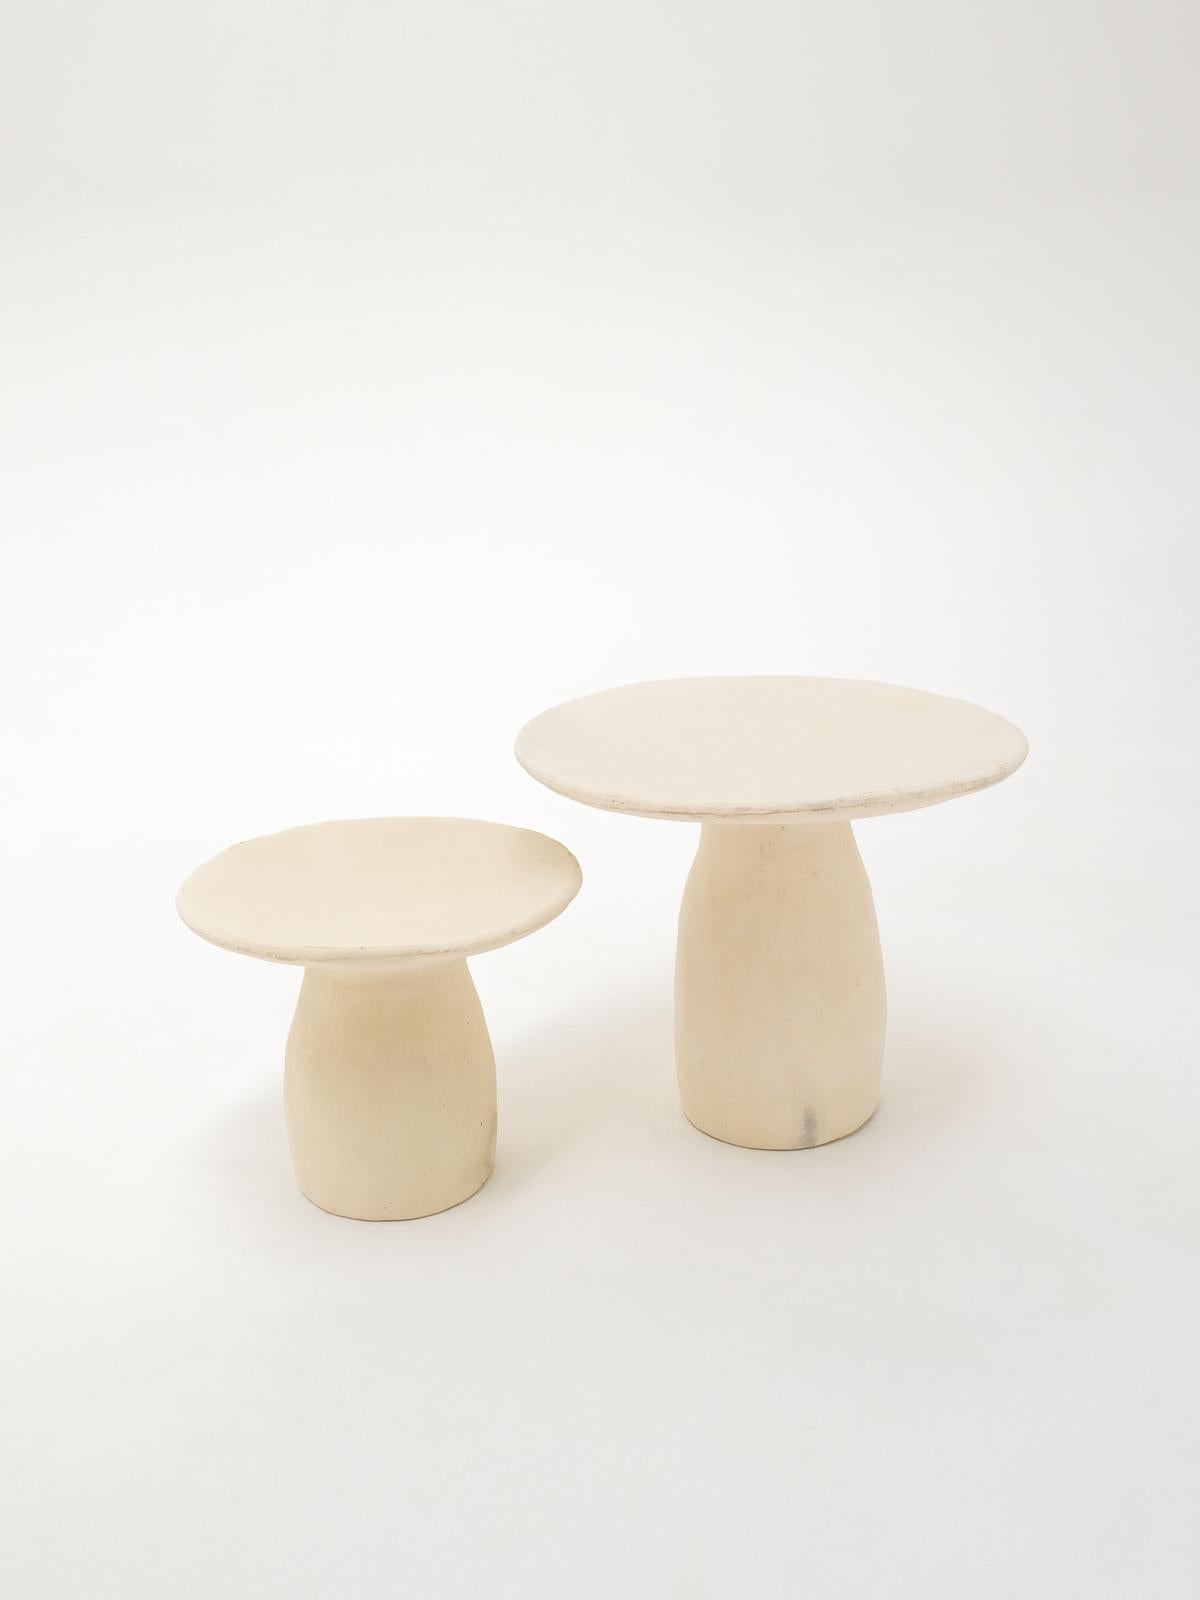 - Handbuilt white side tables, stool for bedroom or living room
- made of clay collected from the potter's surroundings.
- slip applied with natural pigments as whitewash with water
- made in the Moroccan Rif mountains by the potter Houda.
-